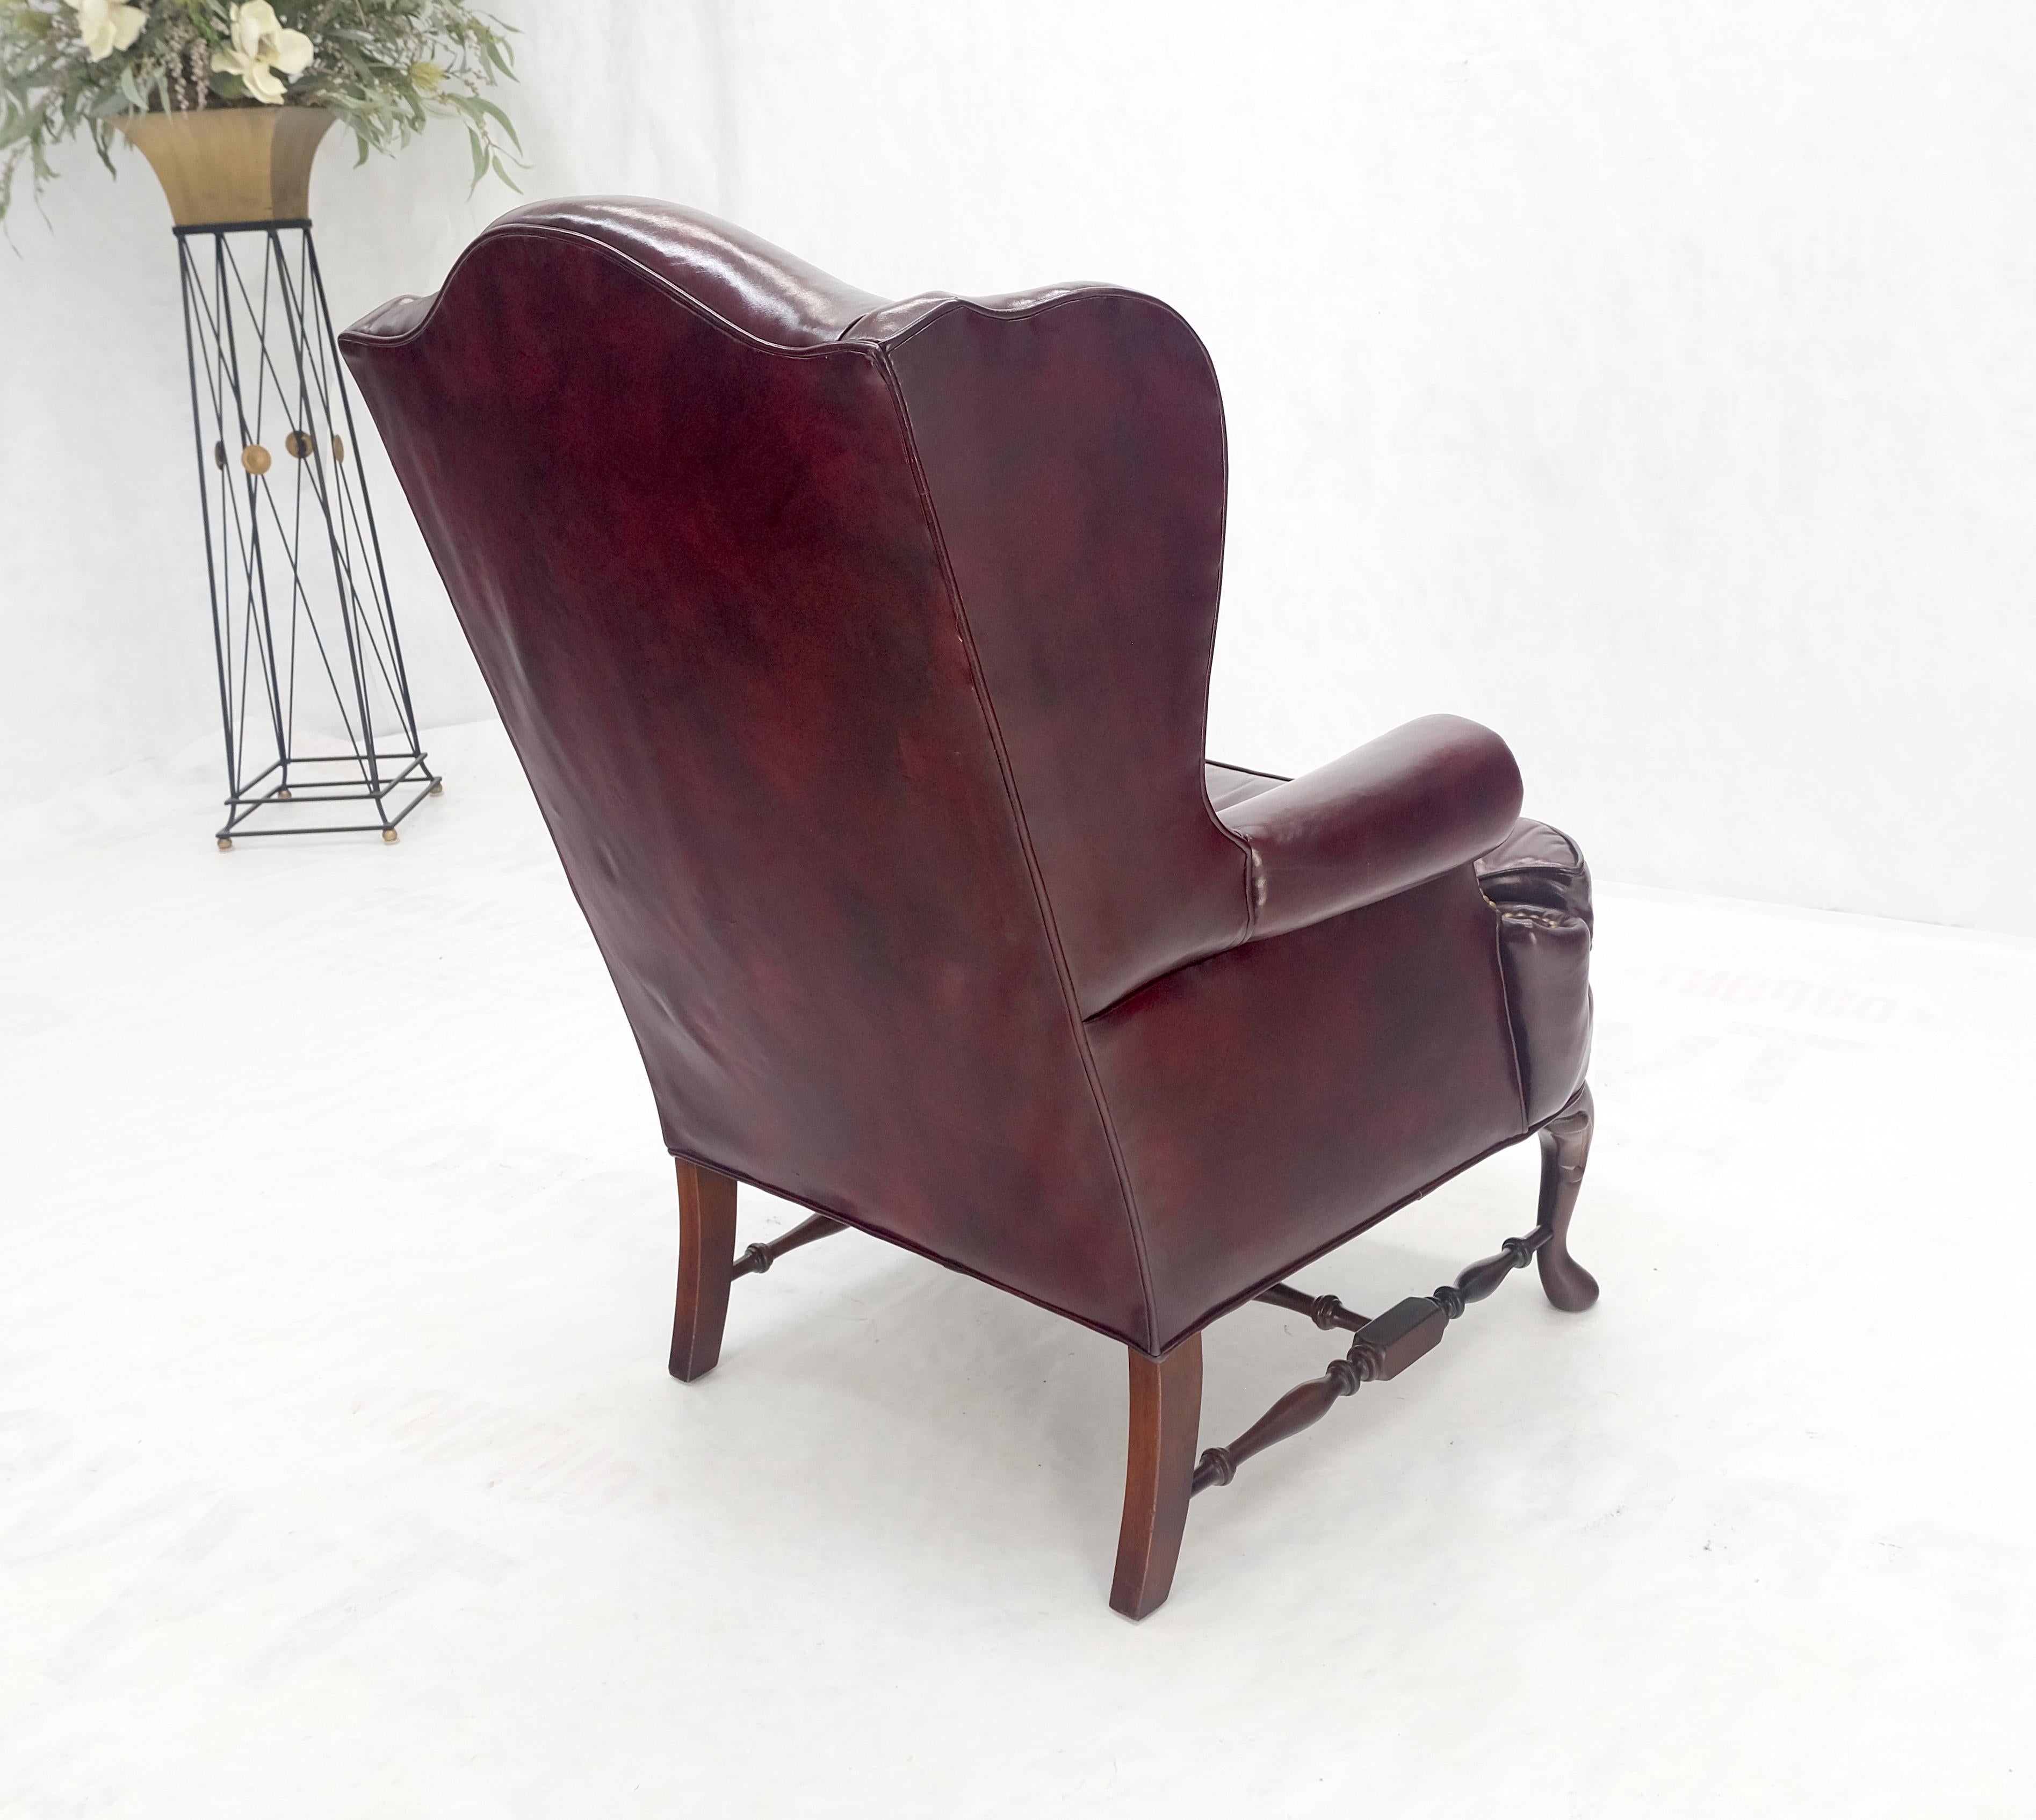 Kindel Burgundy Leather Upholstery Carved Mahogany Legs Wingback Chair & Ottoman en vente 8